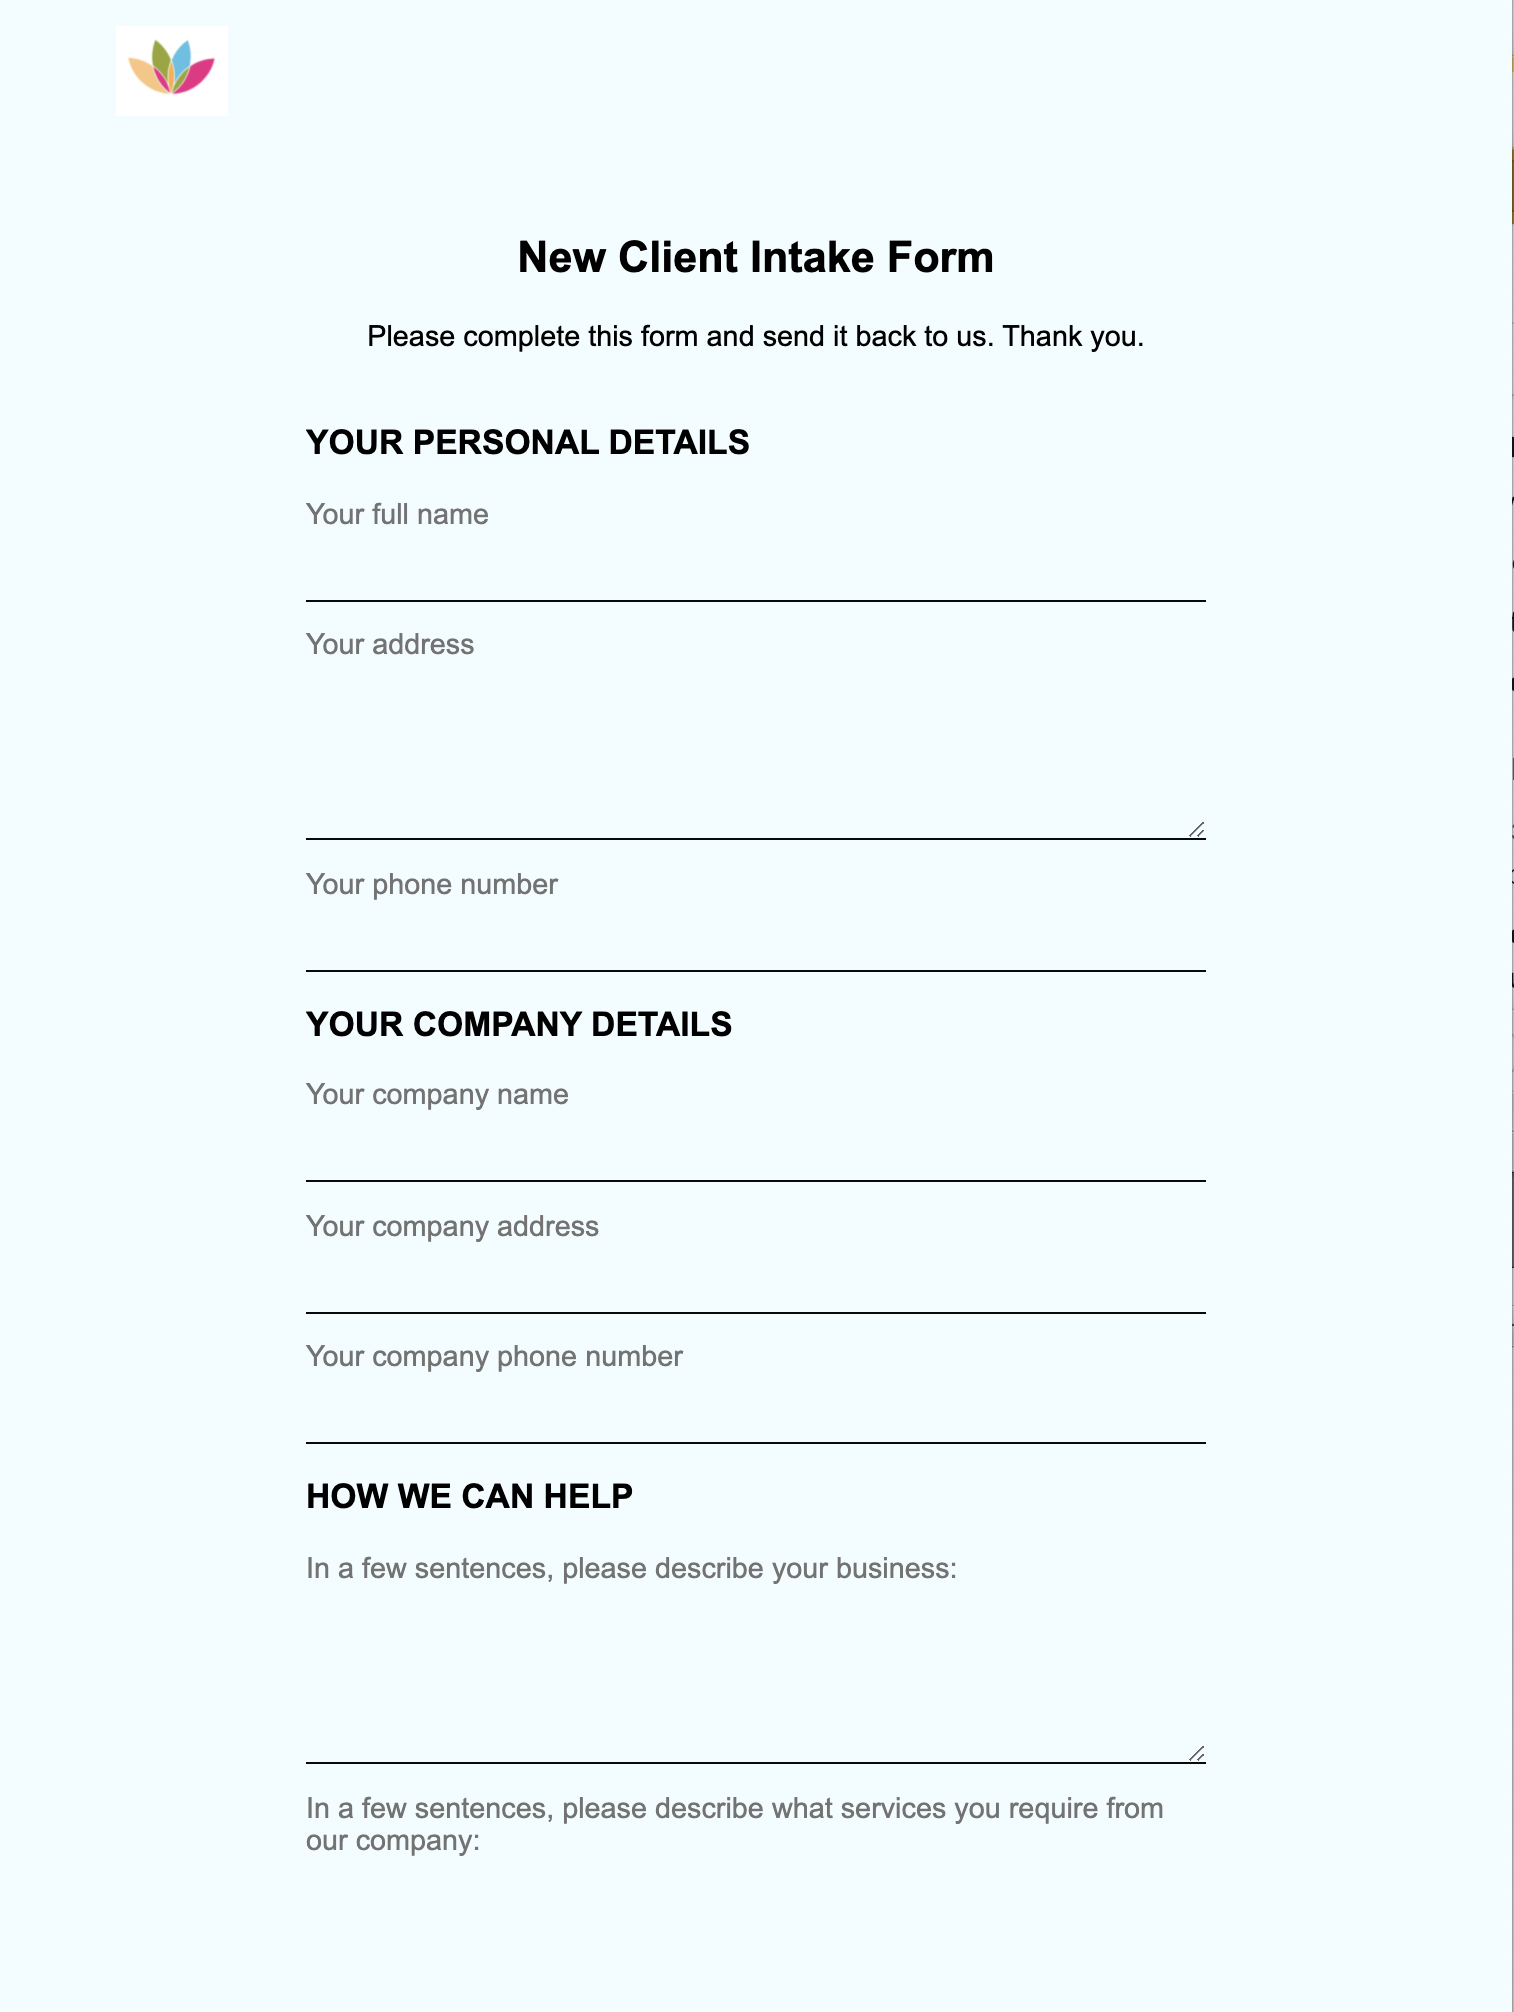 upload form with subheadings